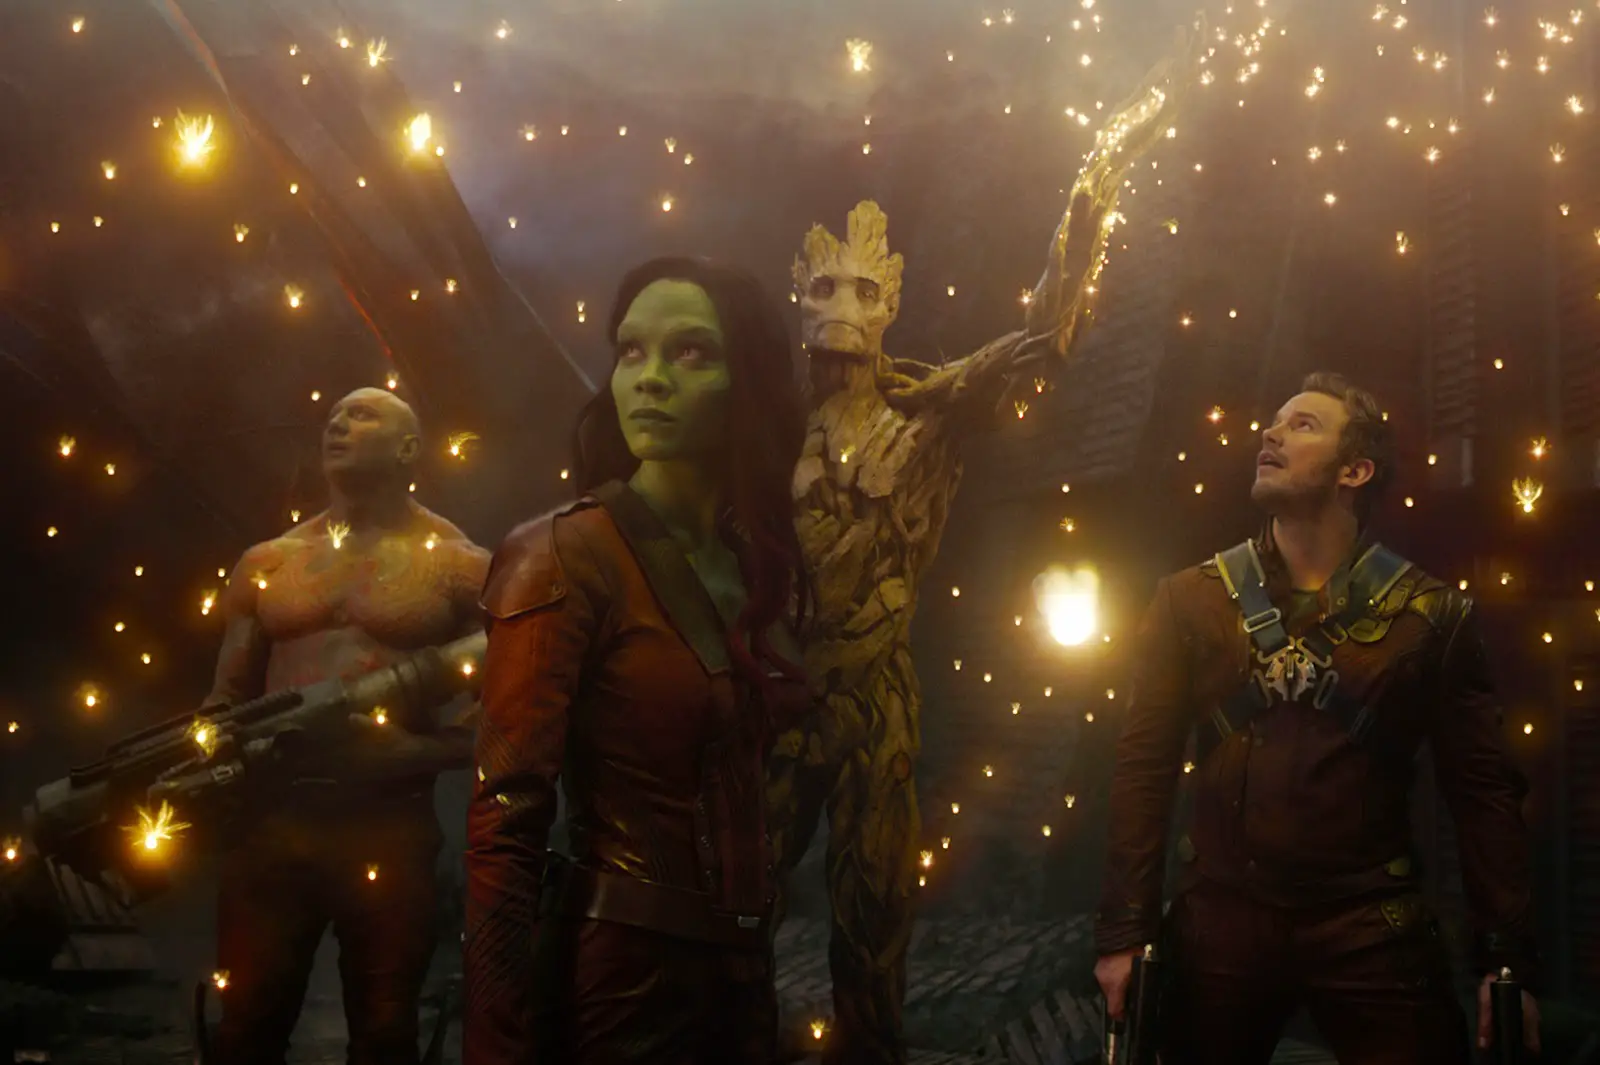 End of Guardians of the Galaxy